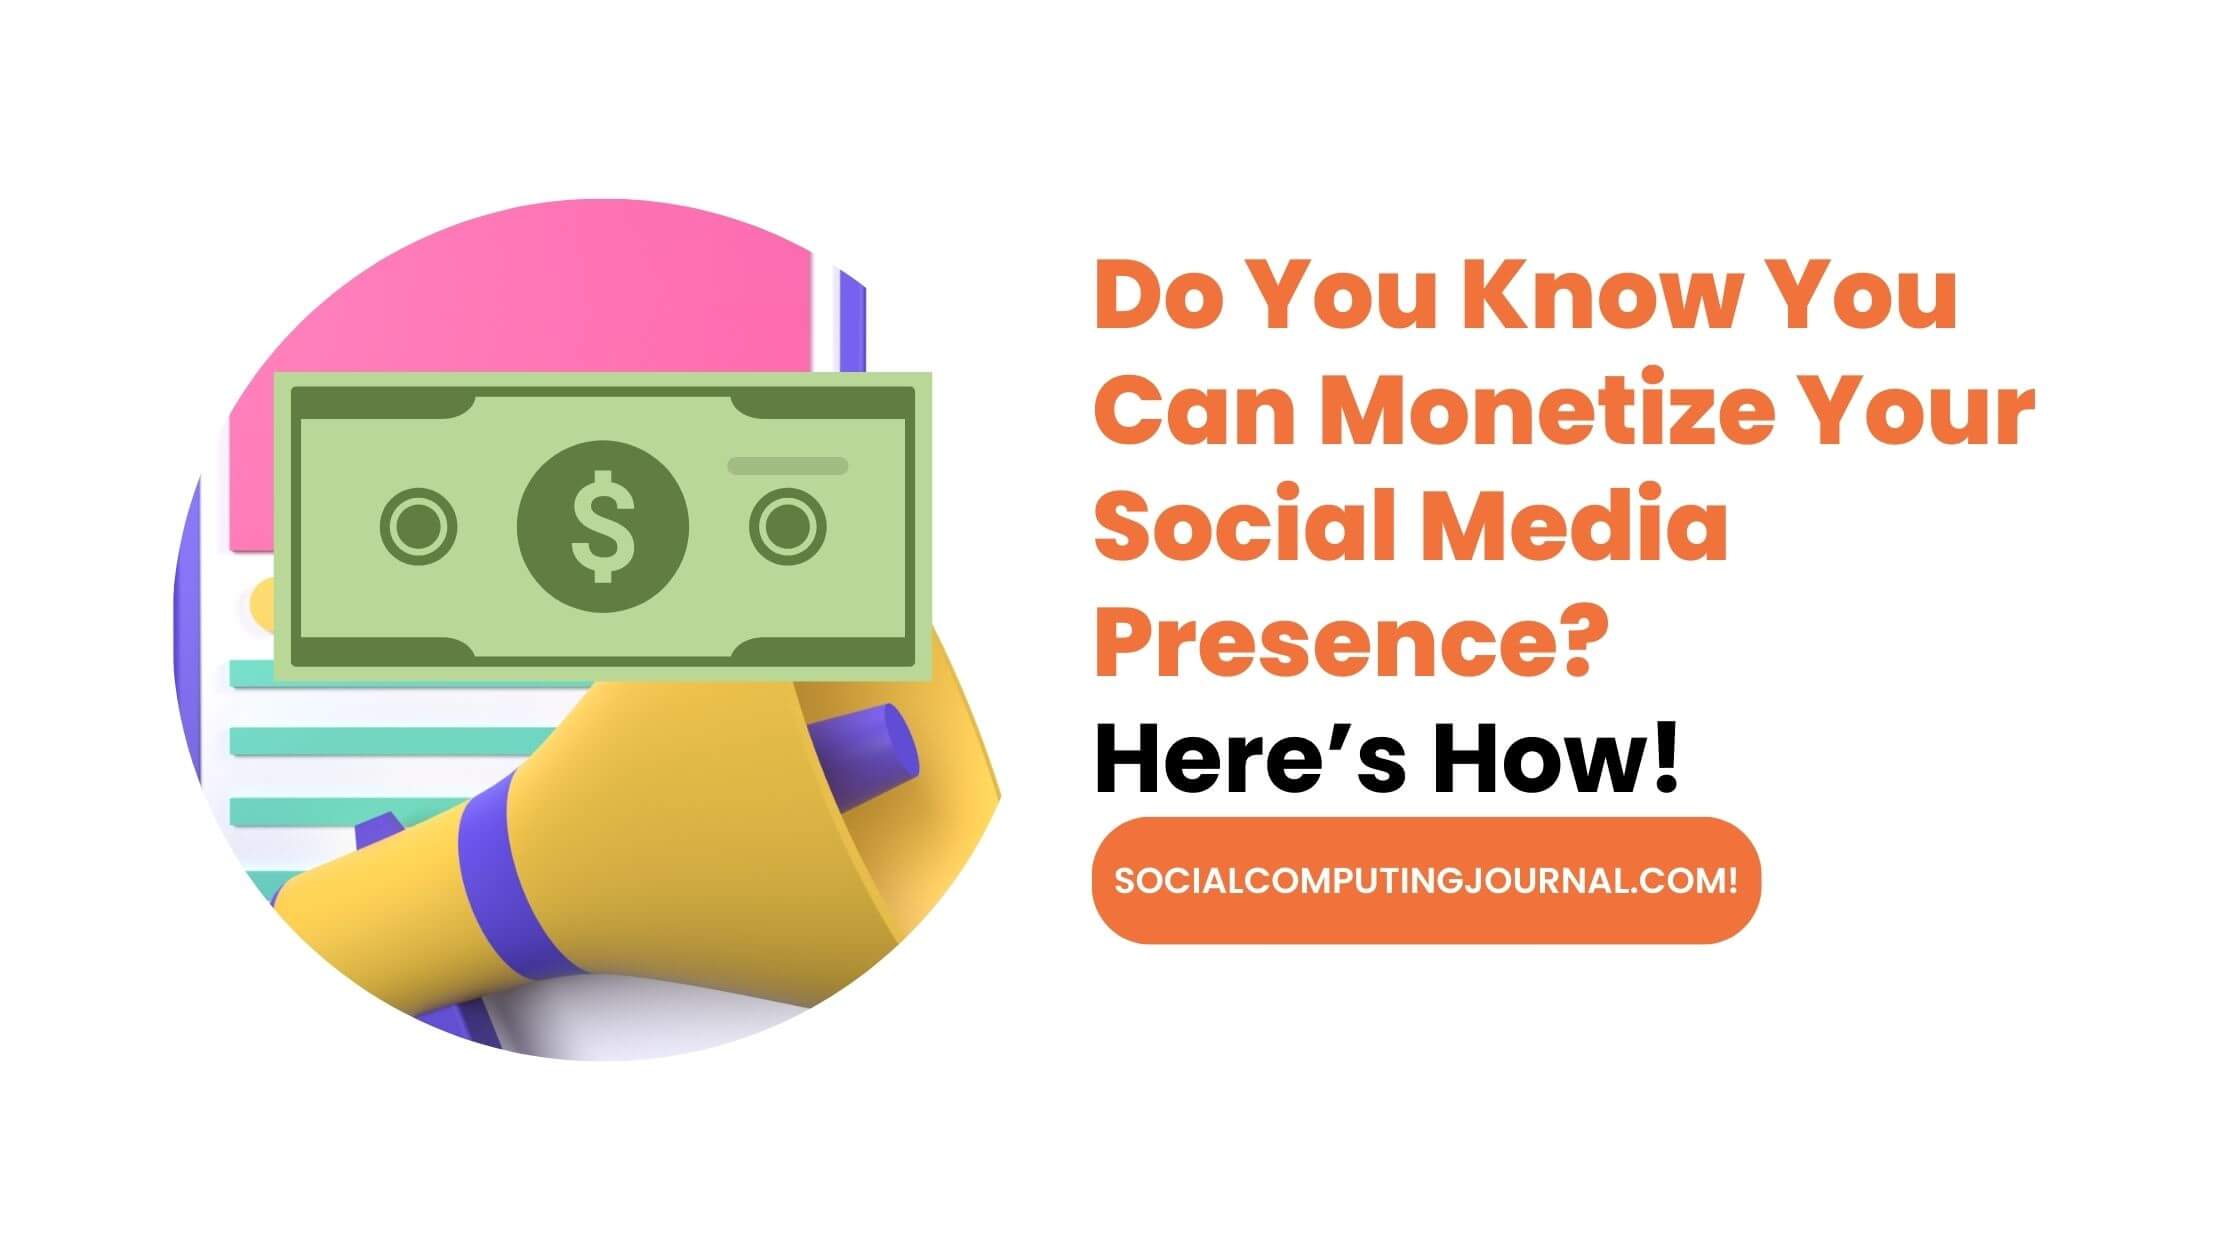 Do You Know You Can Monetize Your Social Media Presence